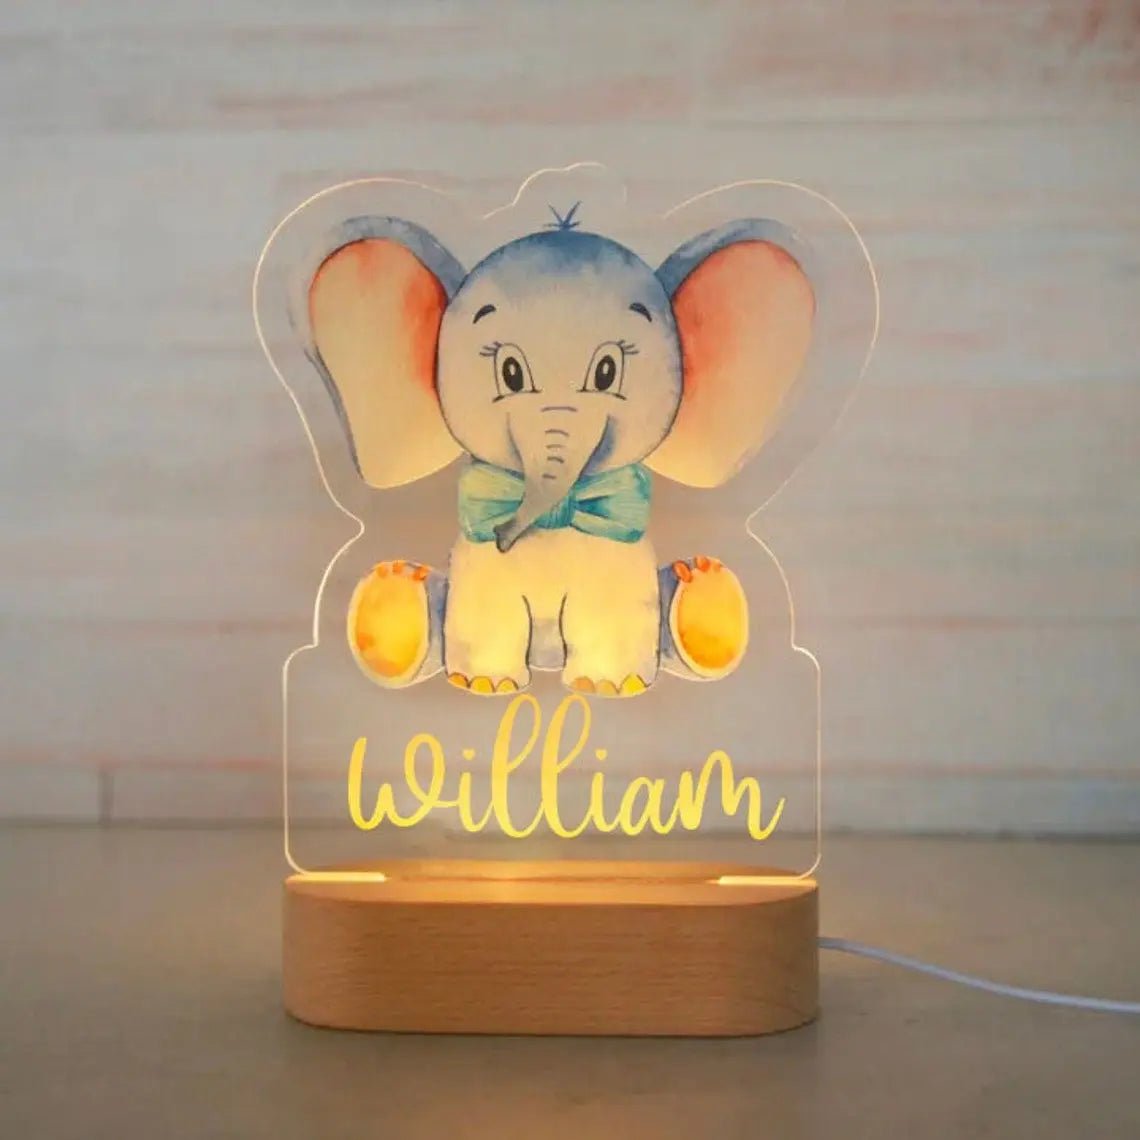 Customized Animal-themed Night Light for Kids - Personalized with Child's Name, Acrylic Lamp for Bedroom Decor Warm Light / 22Elephant